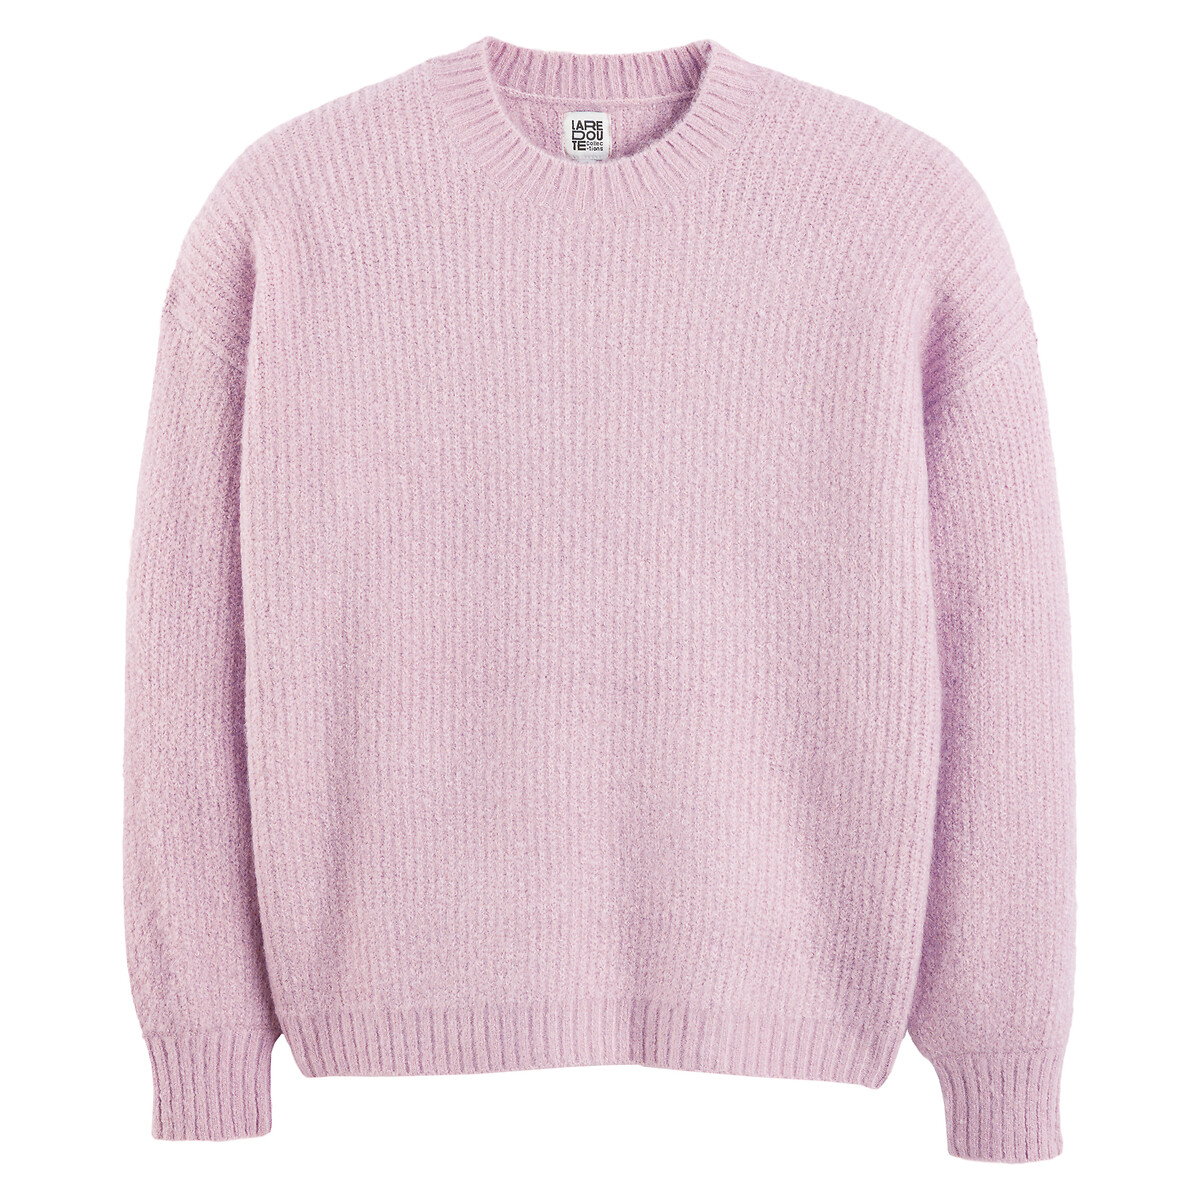 Chunky knit jumper in loose fit, pink, La Redoute Collections